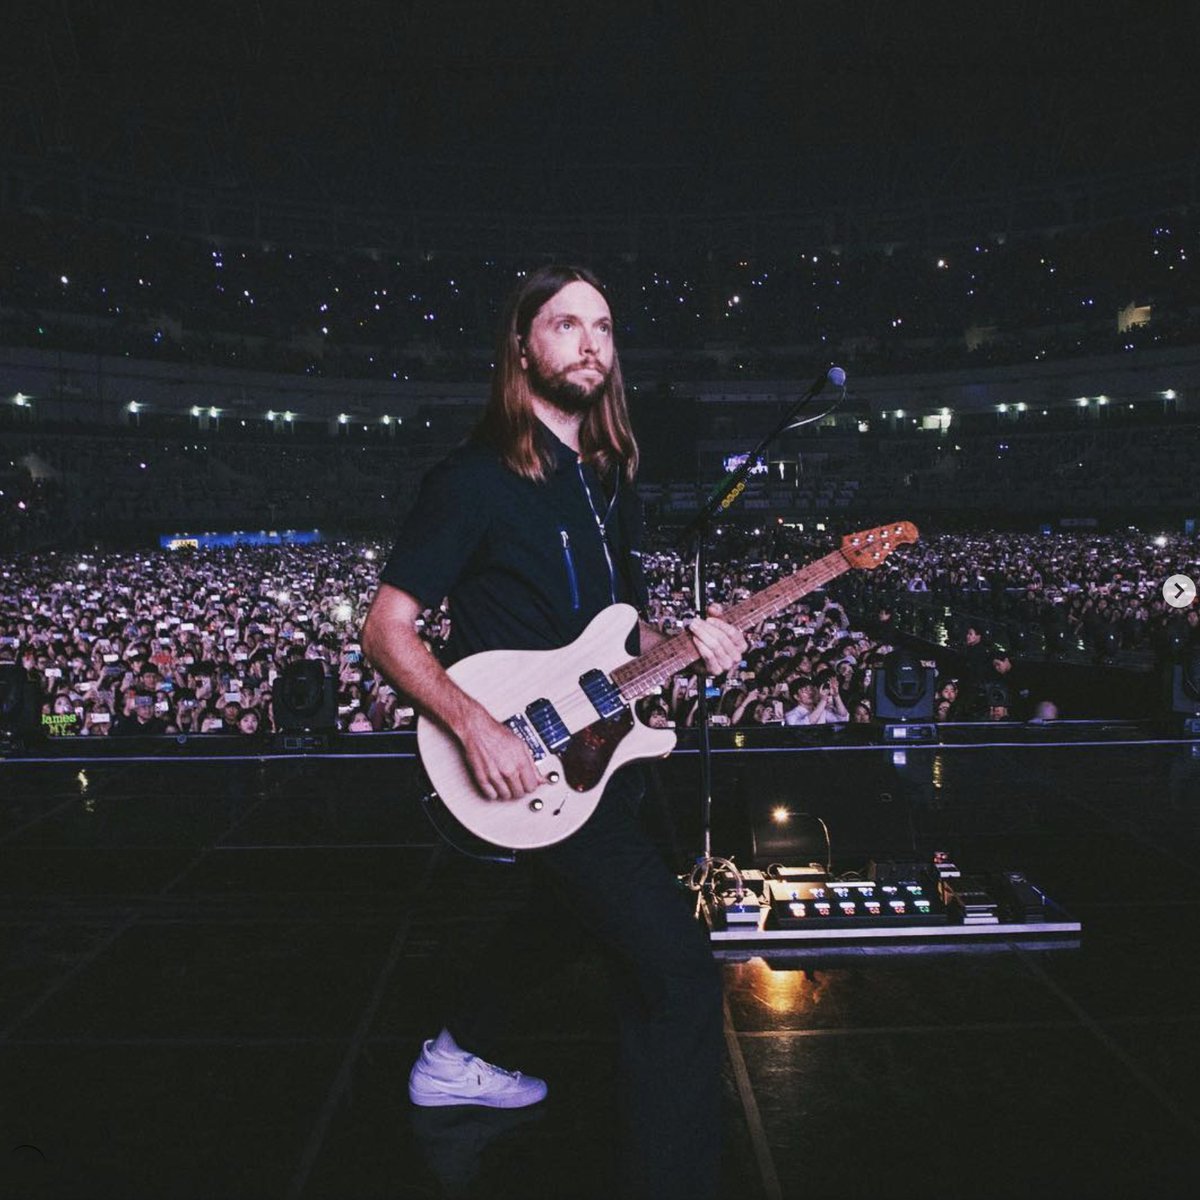 Please help us wish @jamesbvalentine a very Happy Birthday!! 🎉 📸: @bootswallace